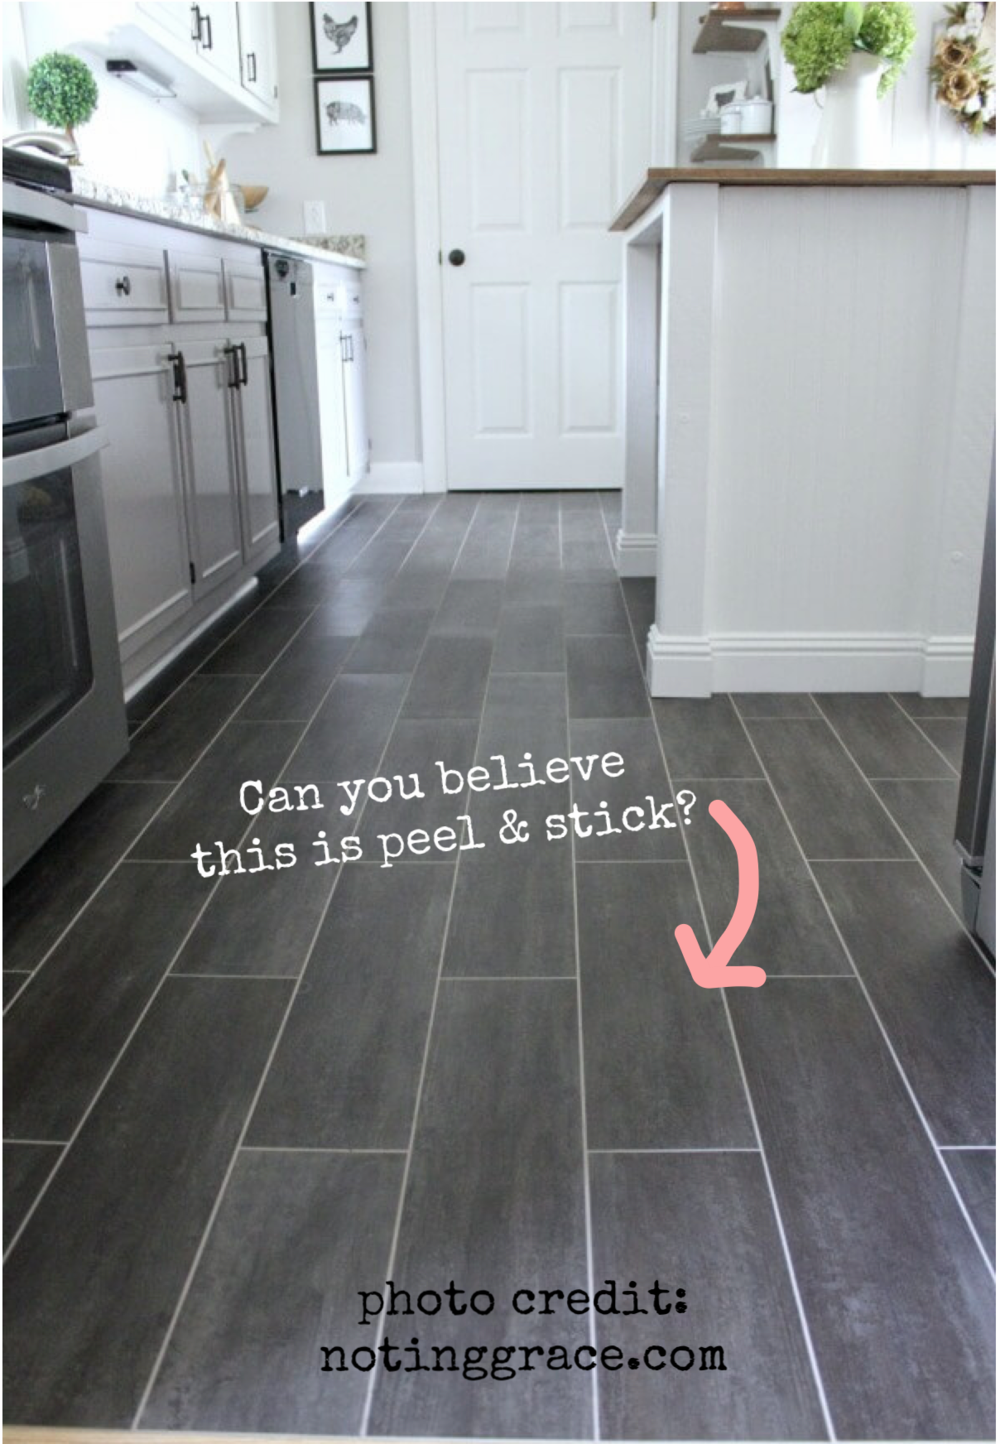 Ideas For Covering Up Tile Floors, Can You Apply Vinyl Flooring Over Tile